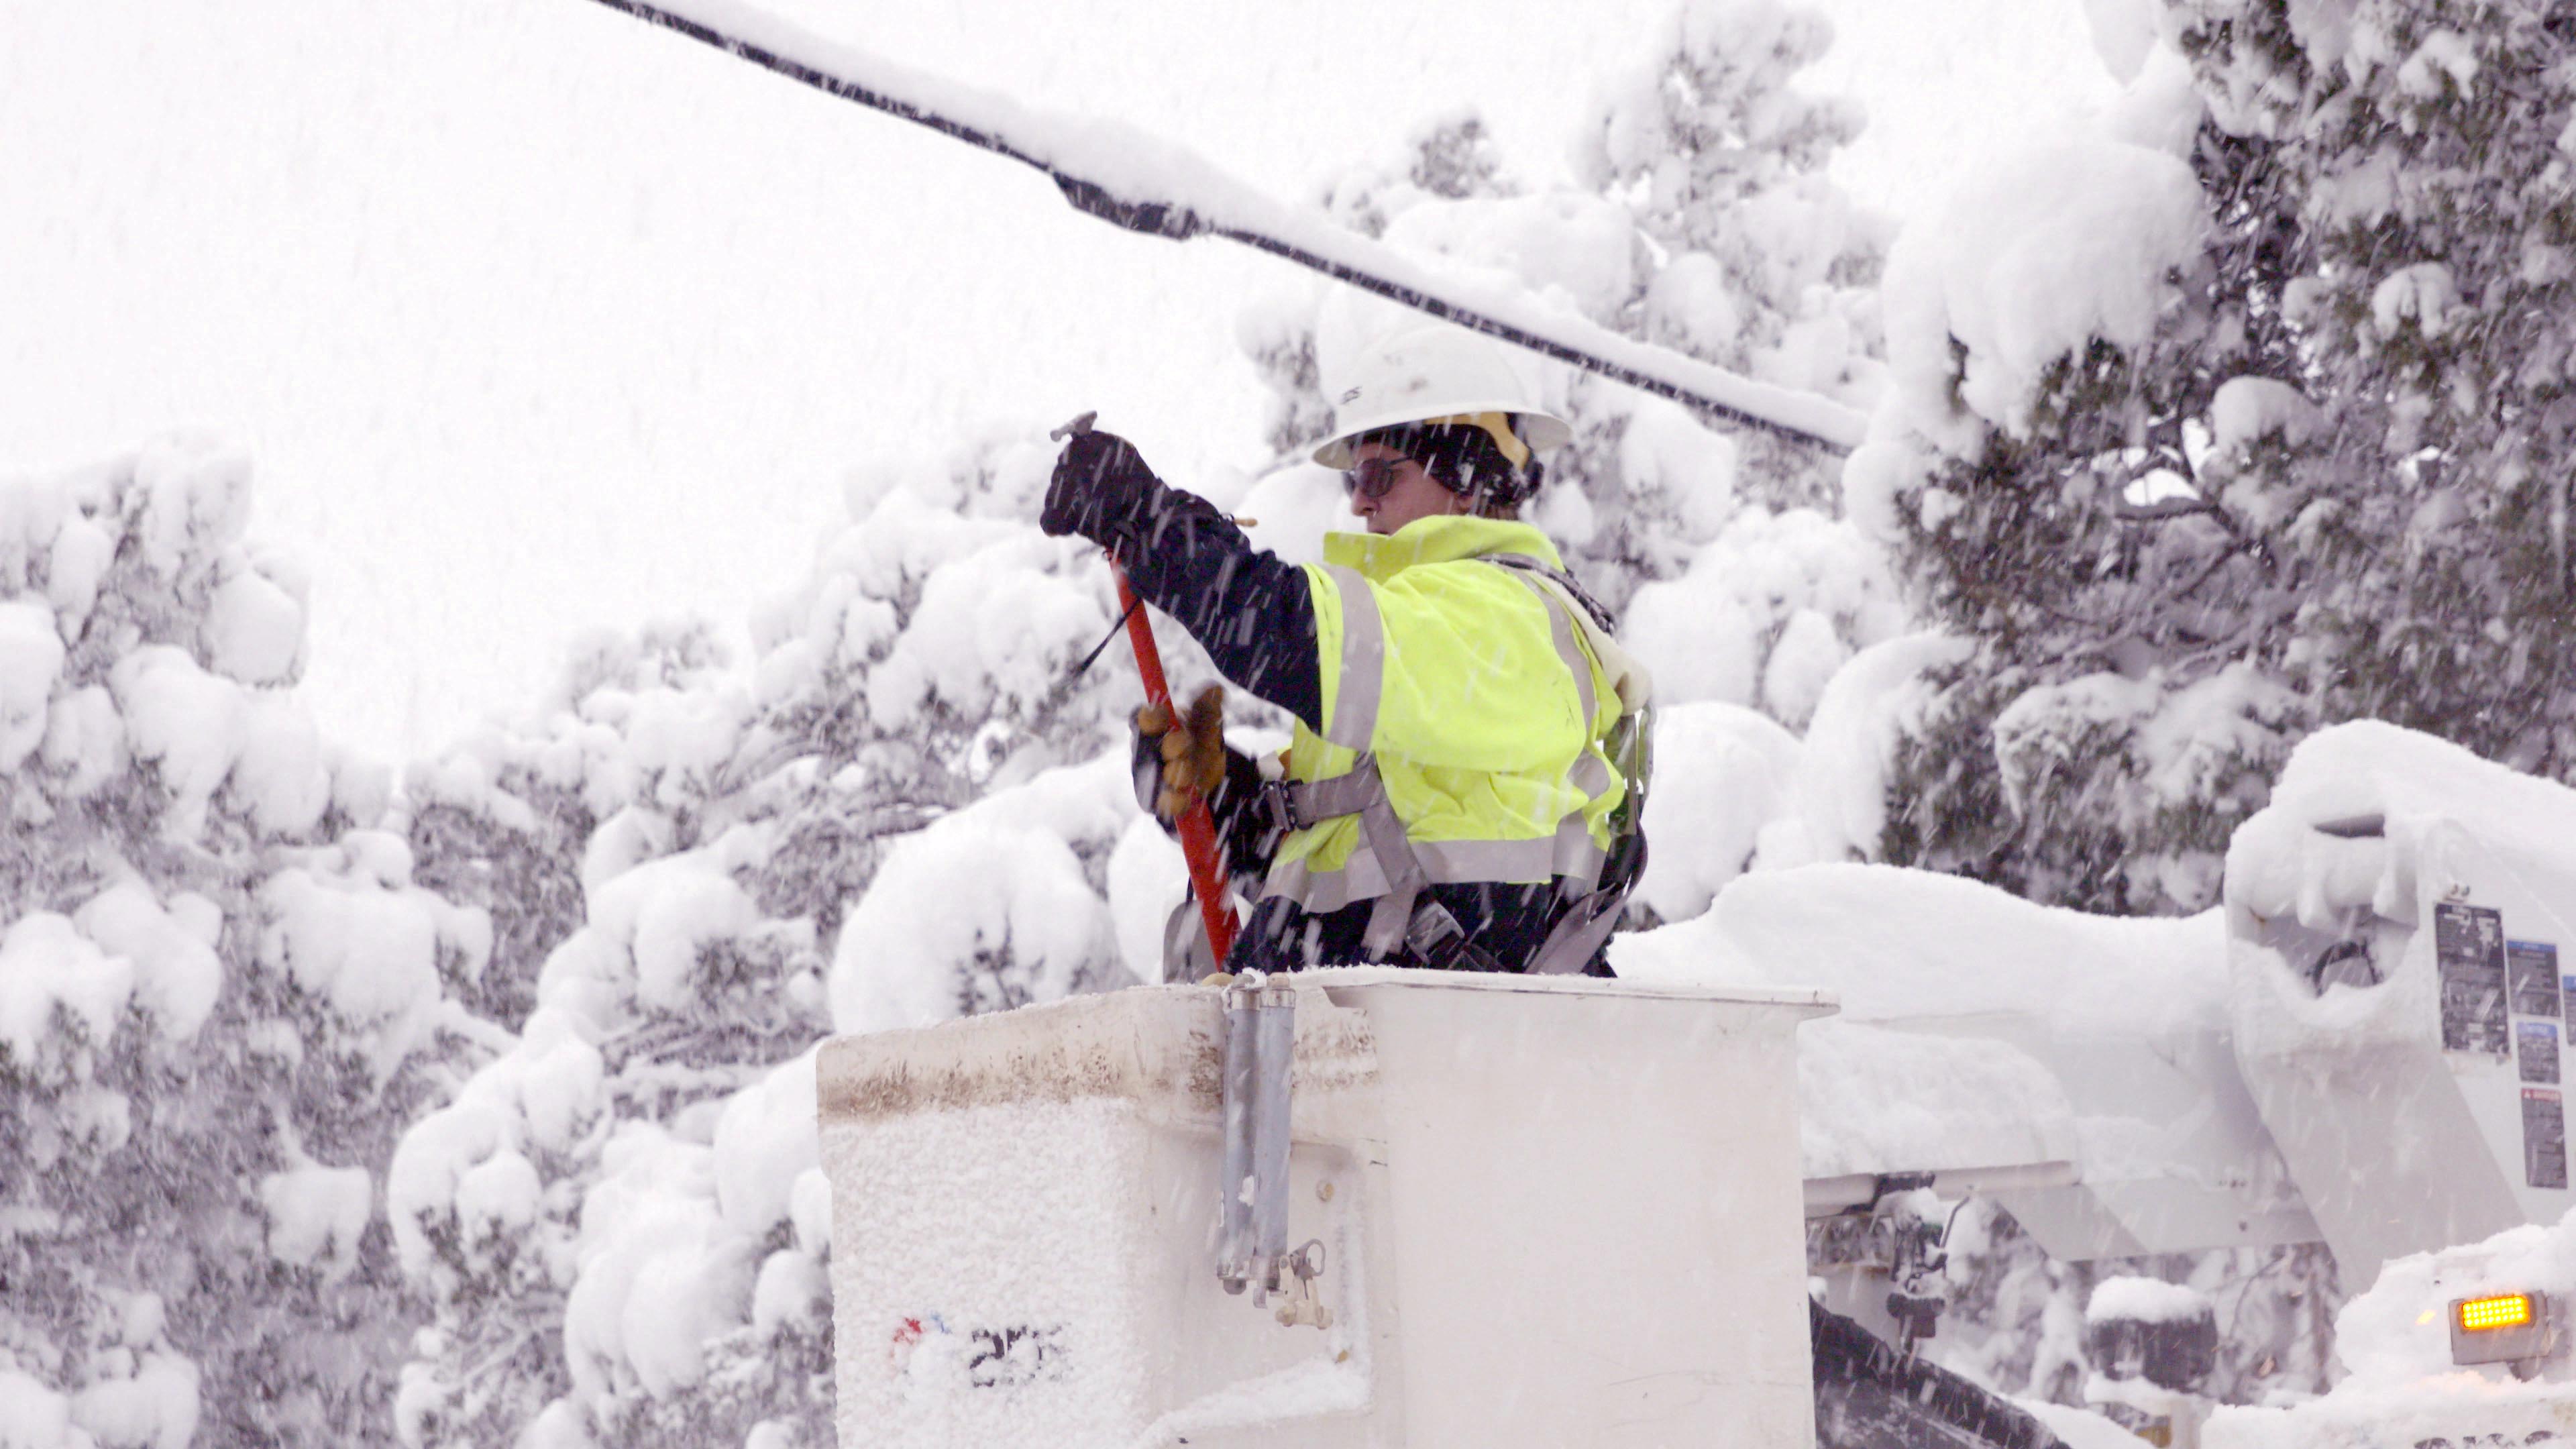 An APS lineman in a bucket working on a power line in the winter snow